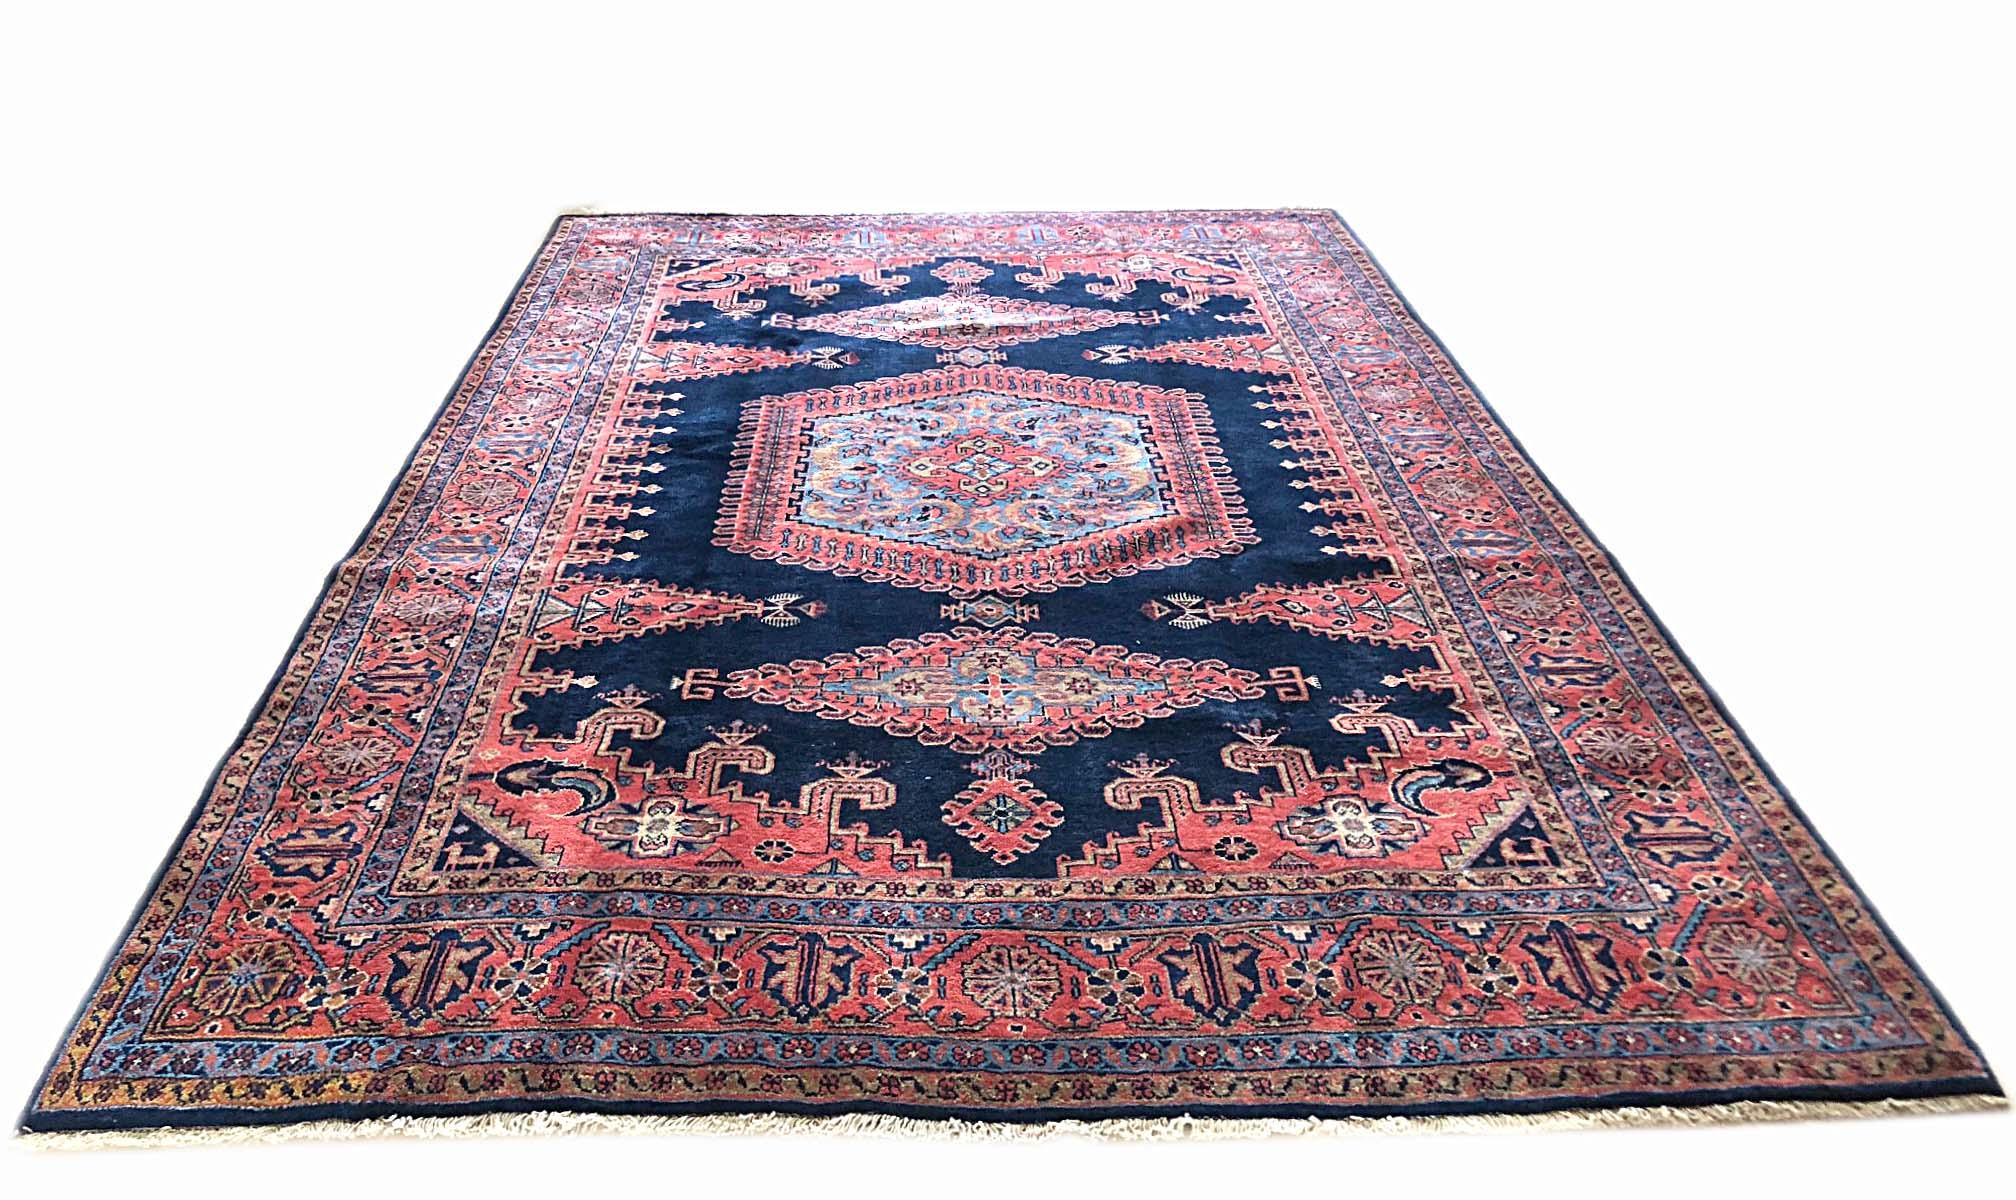 This authentic Persian Viss rug has wool pile and cotton foundation. The age of this rug is almost 50 years old. The base color is dark blue and the border color is salmon. This beautiful piece has a hexagonal shape medallion. The size of this rug